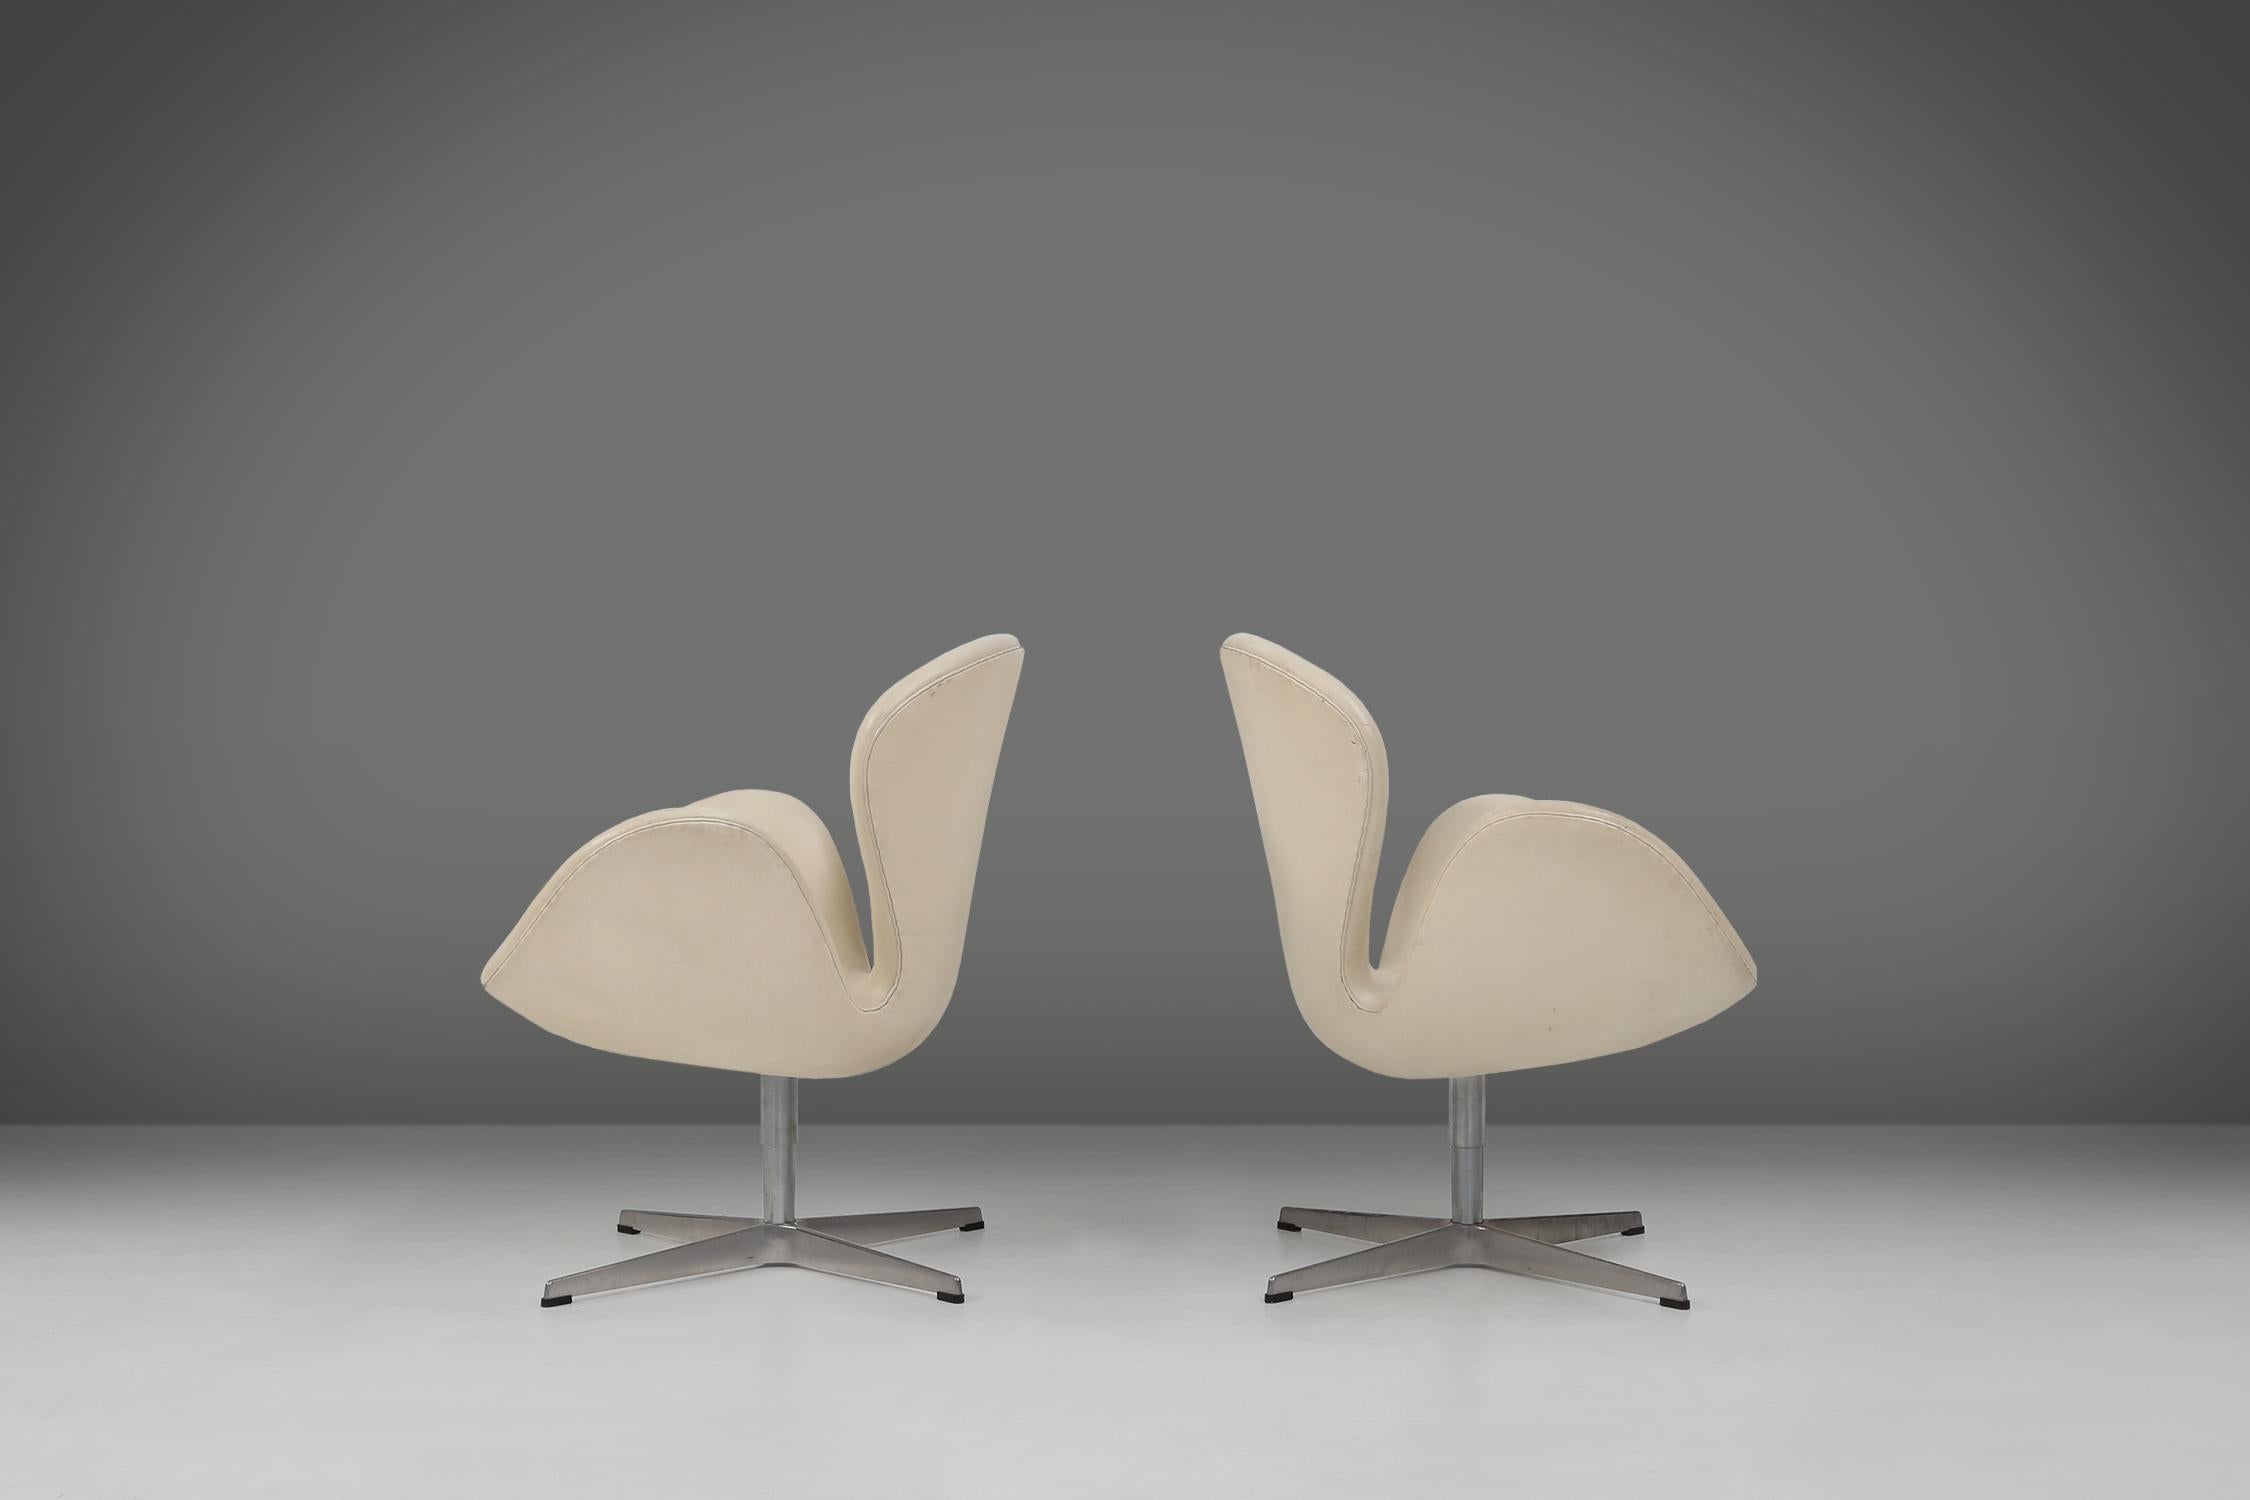 The Swan chair is an iconic design by renowned Danish architect and designer Arne Jacobsen. He designed this chair in 1958 for the lobby and lounge of the SAS Royal Hotel in Copenhagen. The chair has no straight lines, but an organic and soft shape